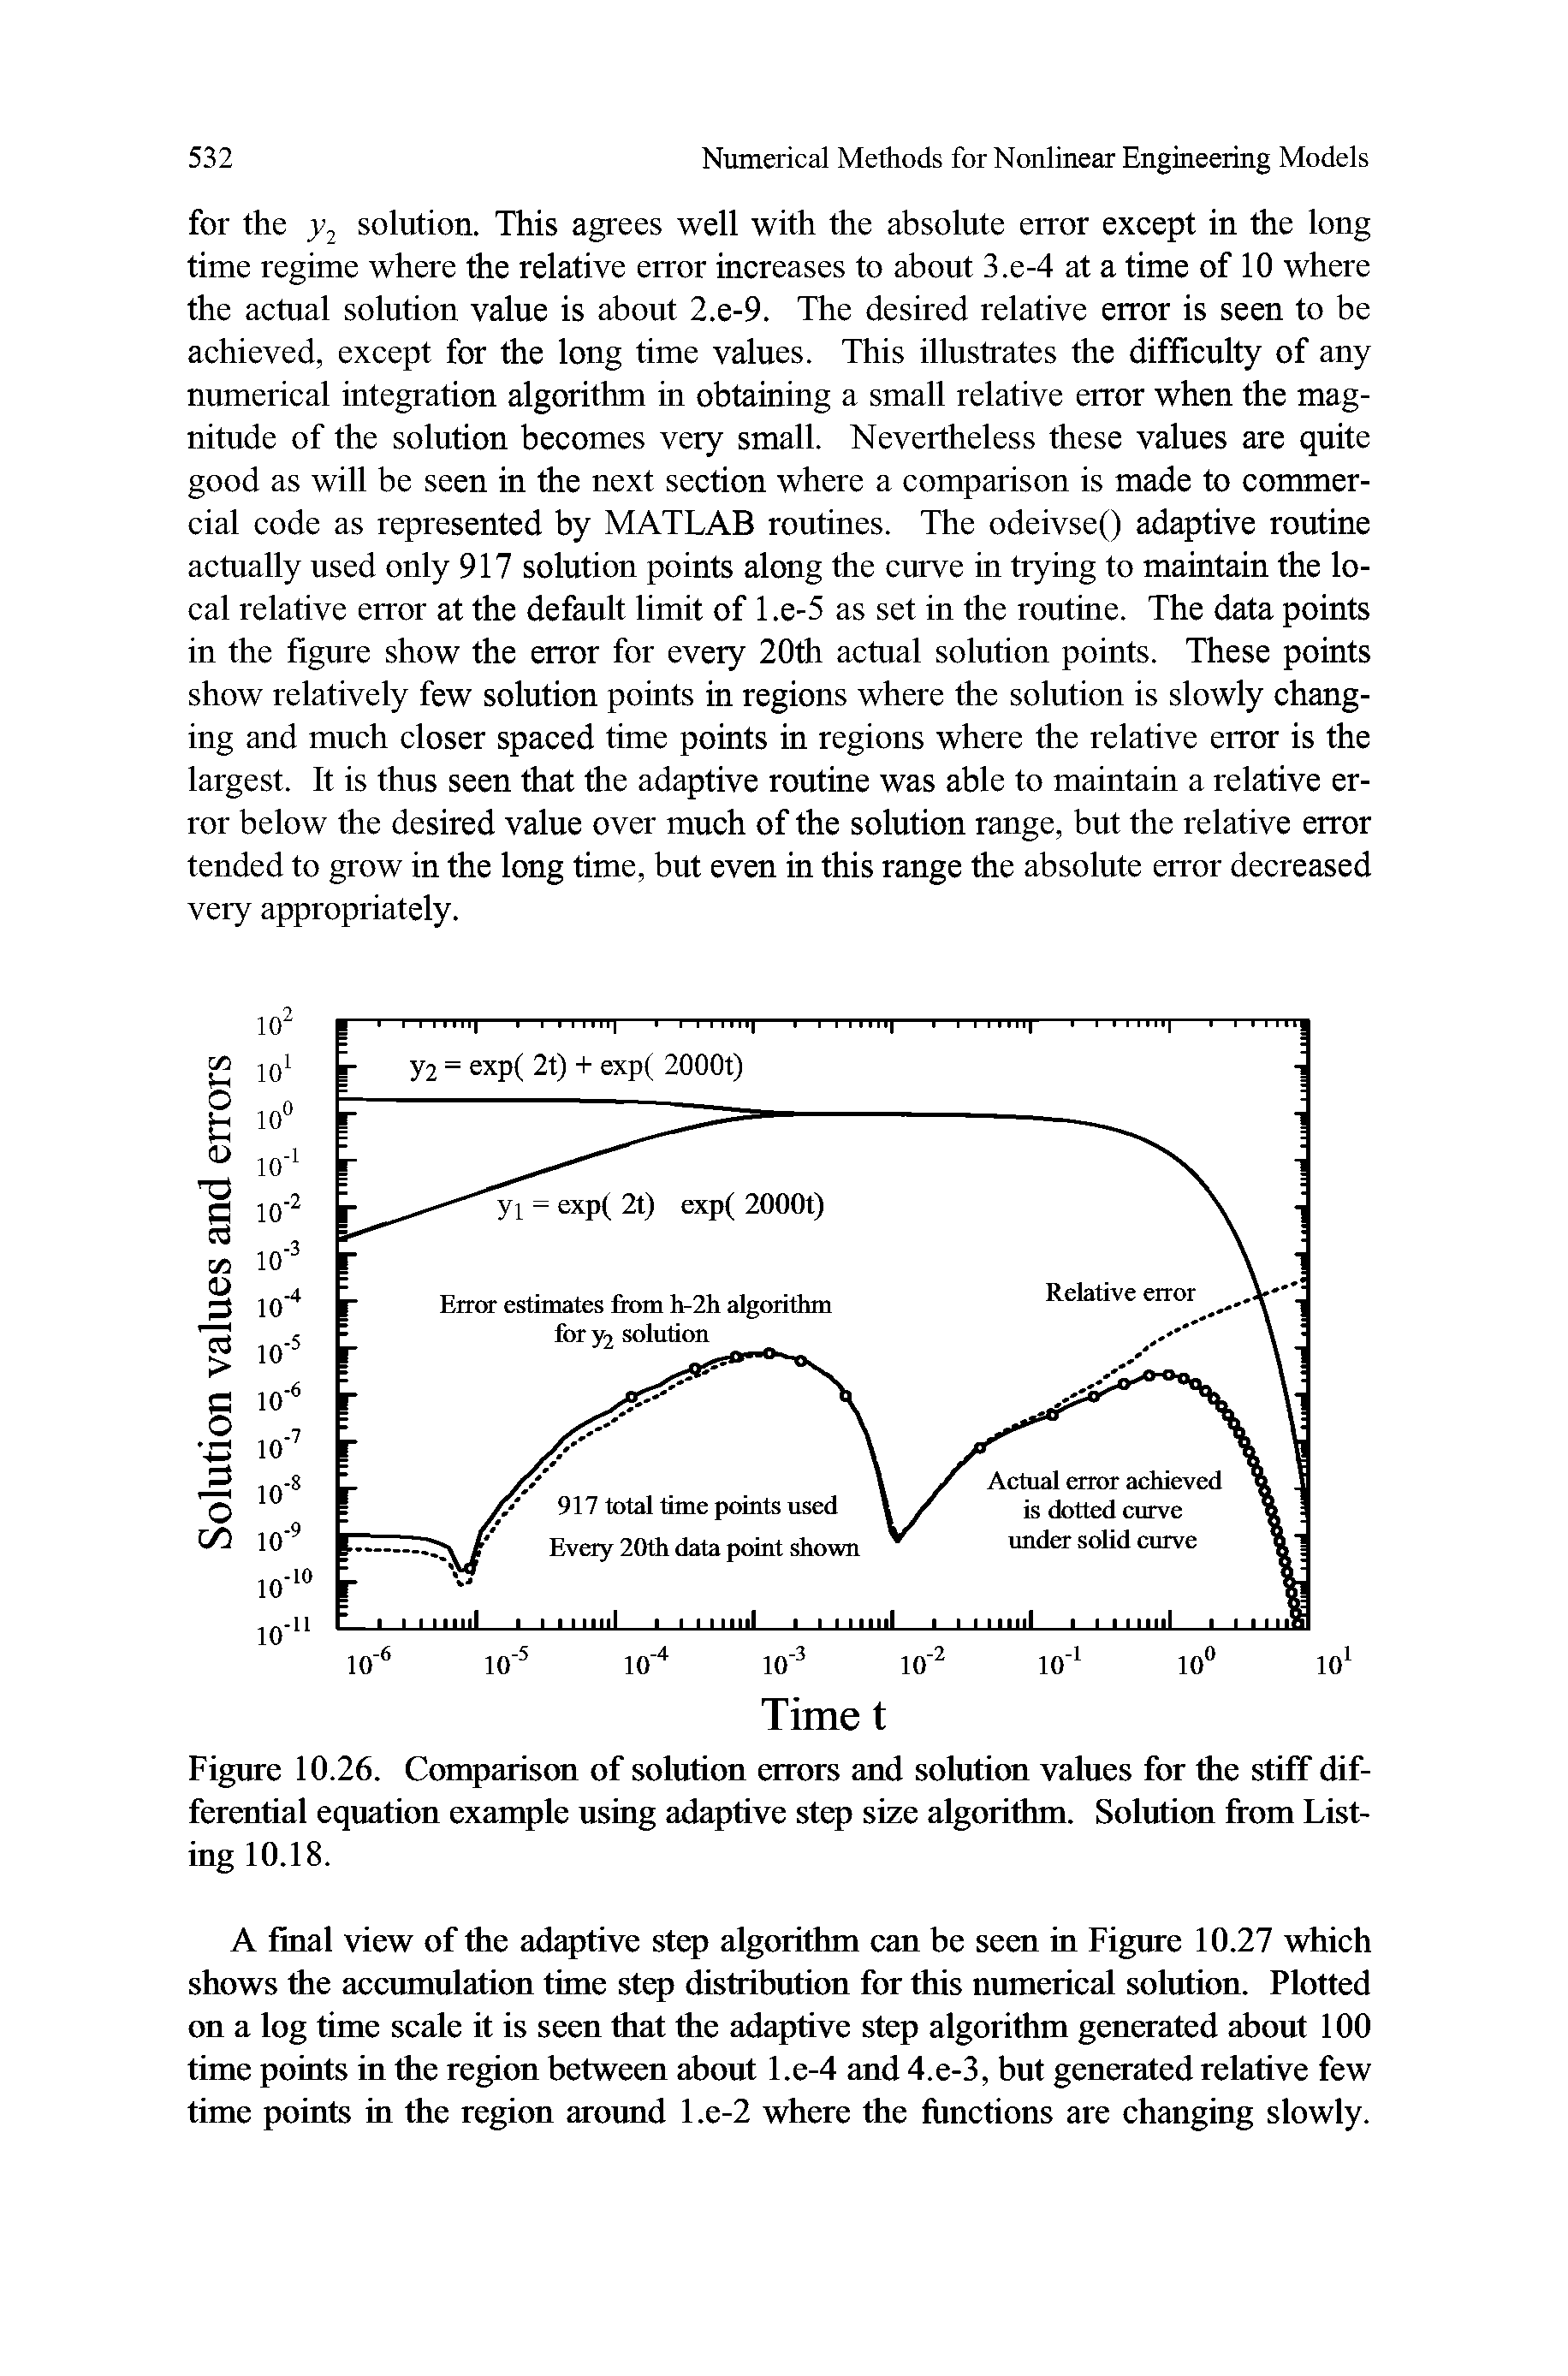 Figure 10.26. Comparison of solution errors and solution values for the stiff differential equation example using adaptive step size algorithm. Solution from Listing 10.18.